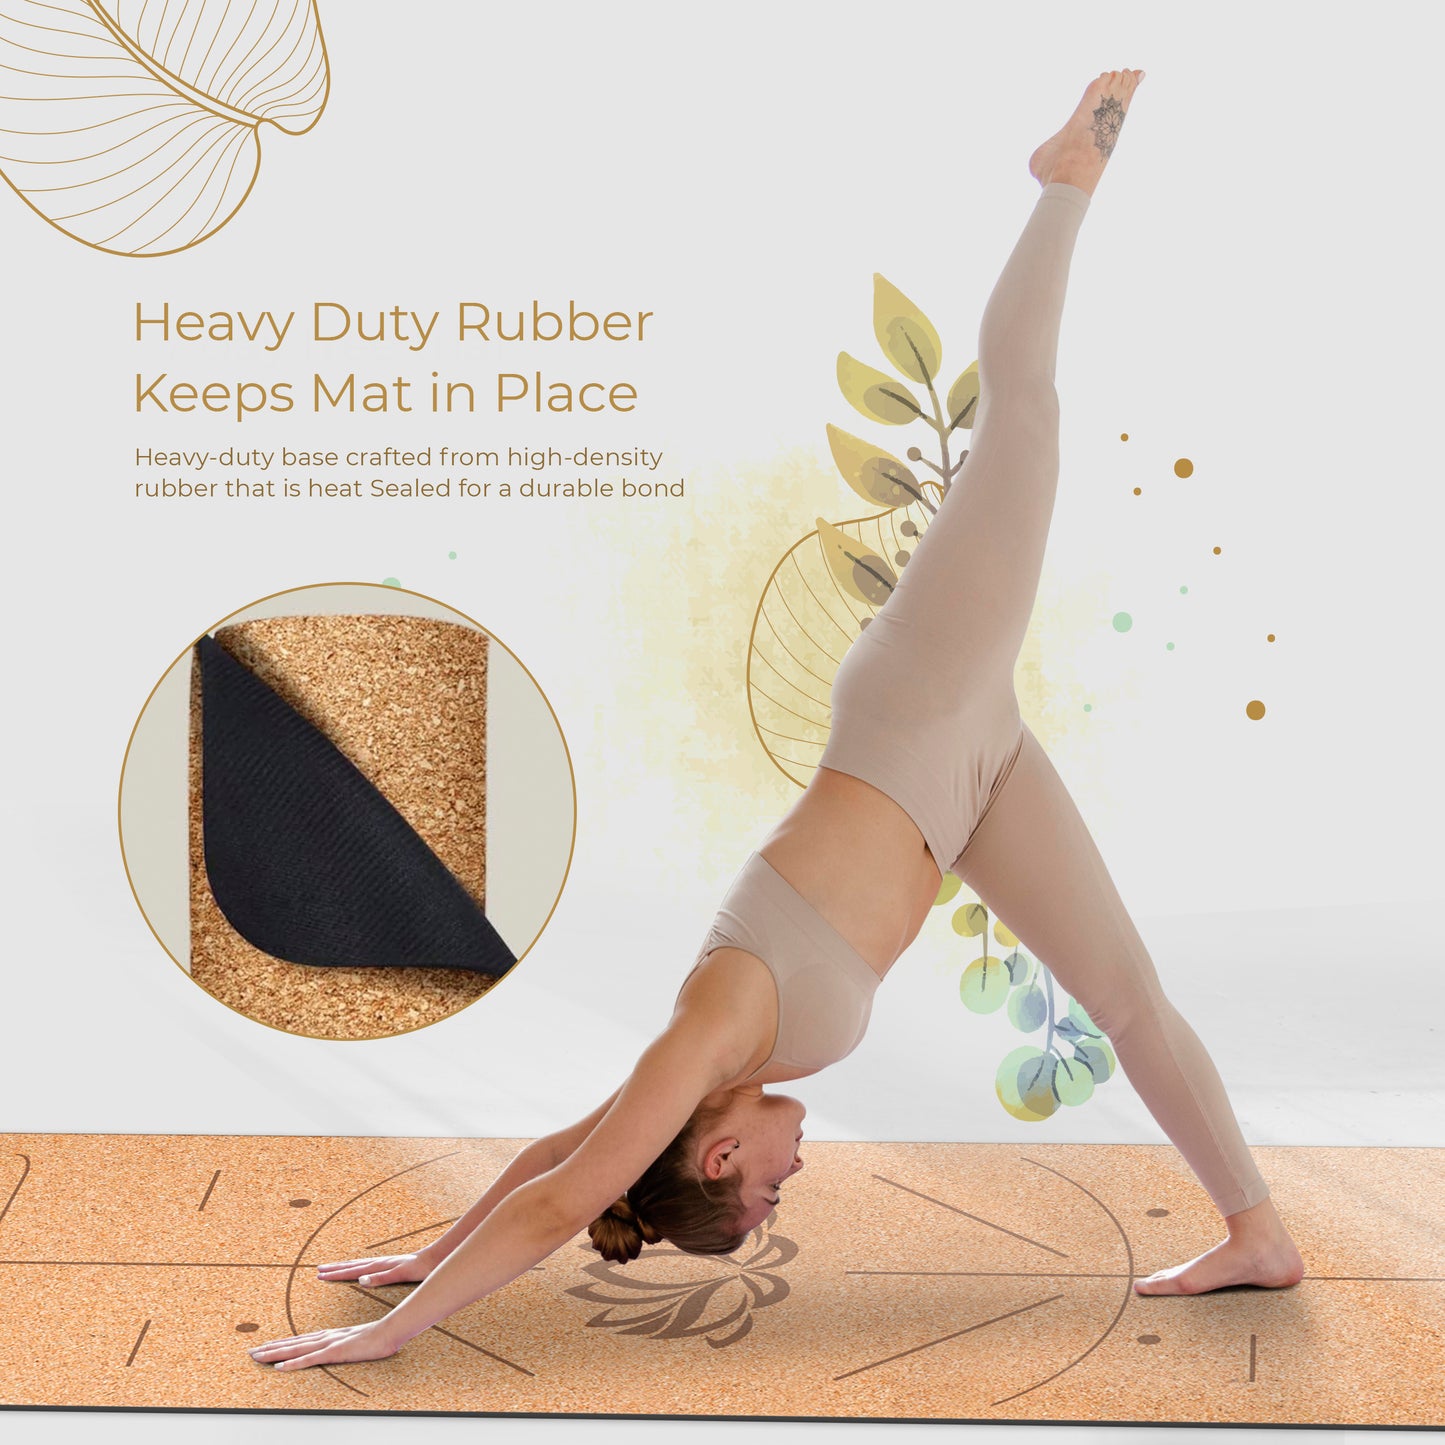 Eco-Friendly Yoga Mat | Cork + Natural Rubber | Includes Carrying Strap | With Alingment lines | Non Slip Exercise & Fitness for Home Workout